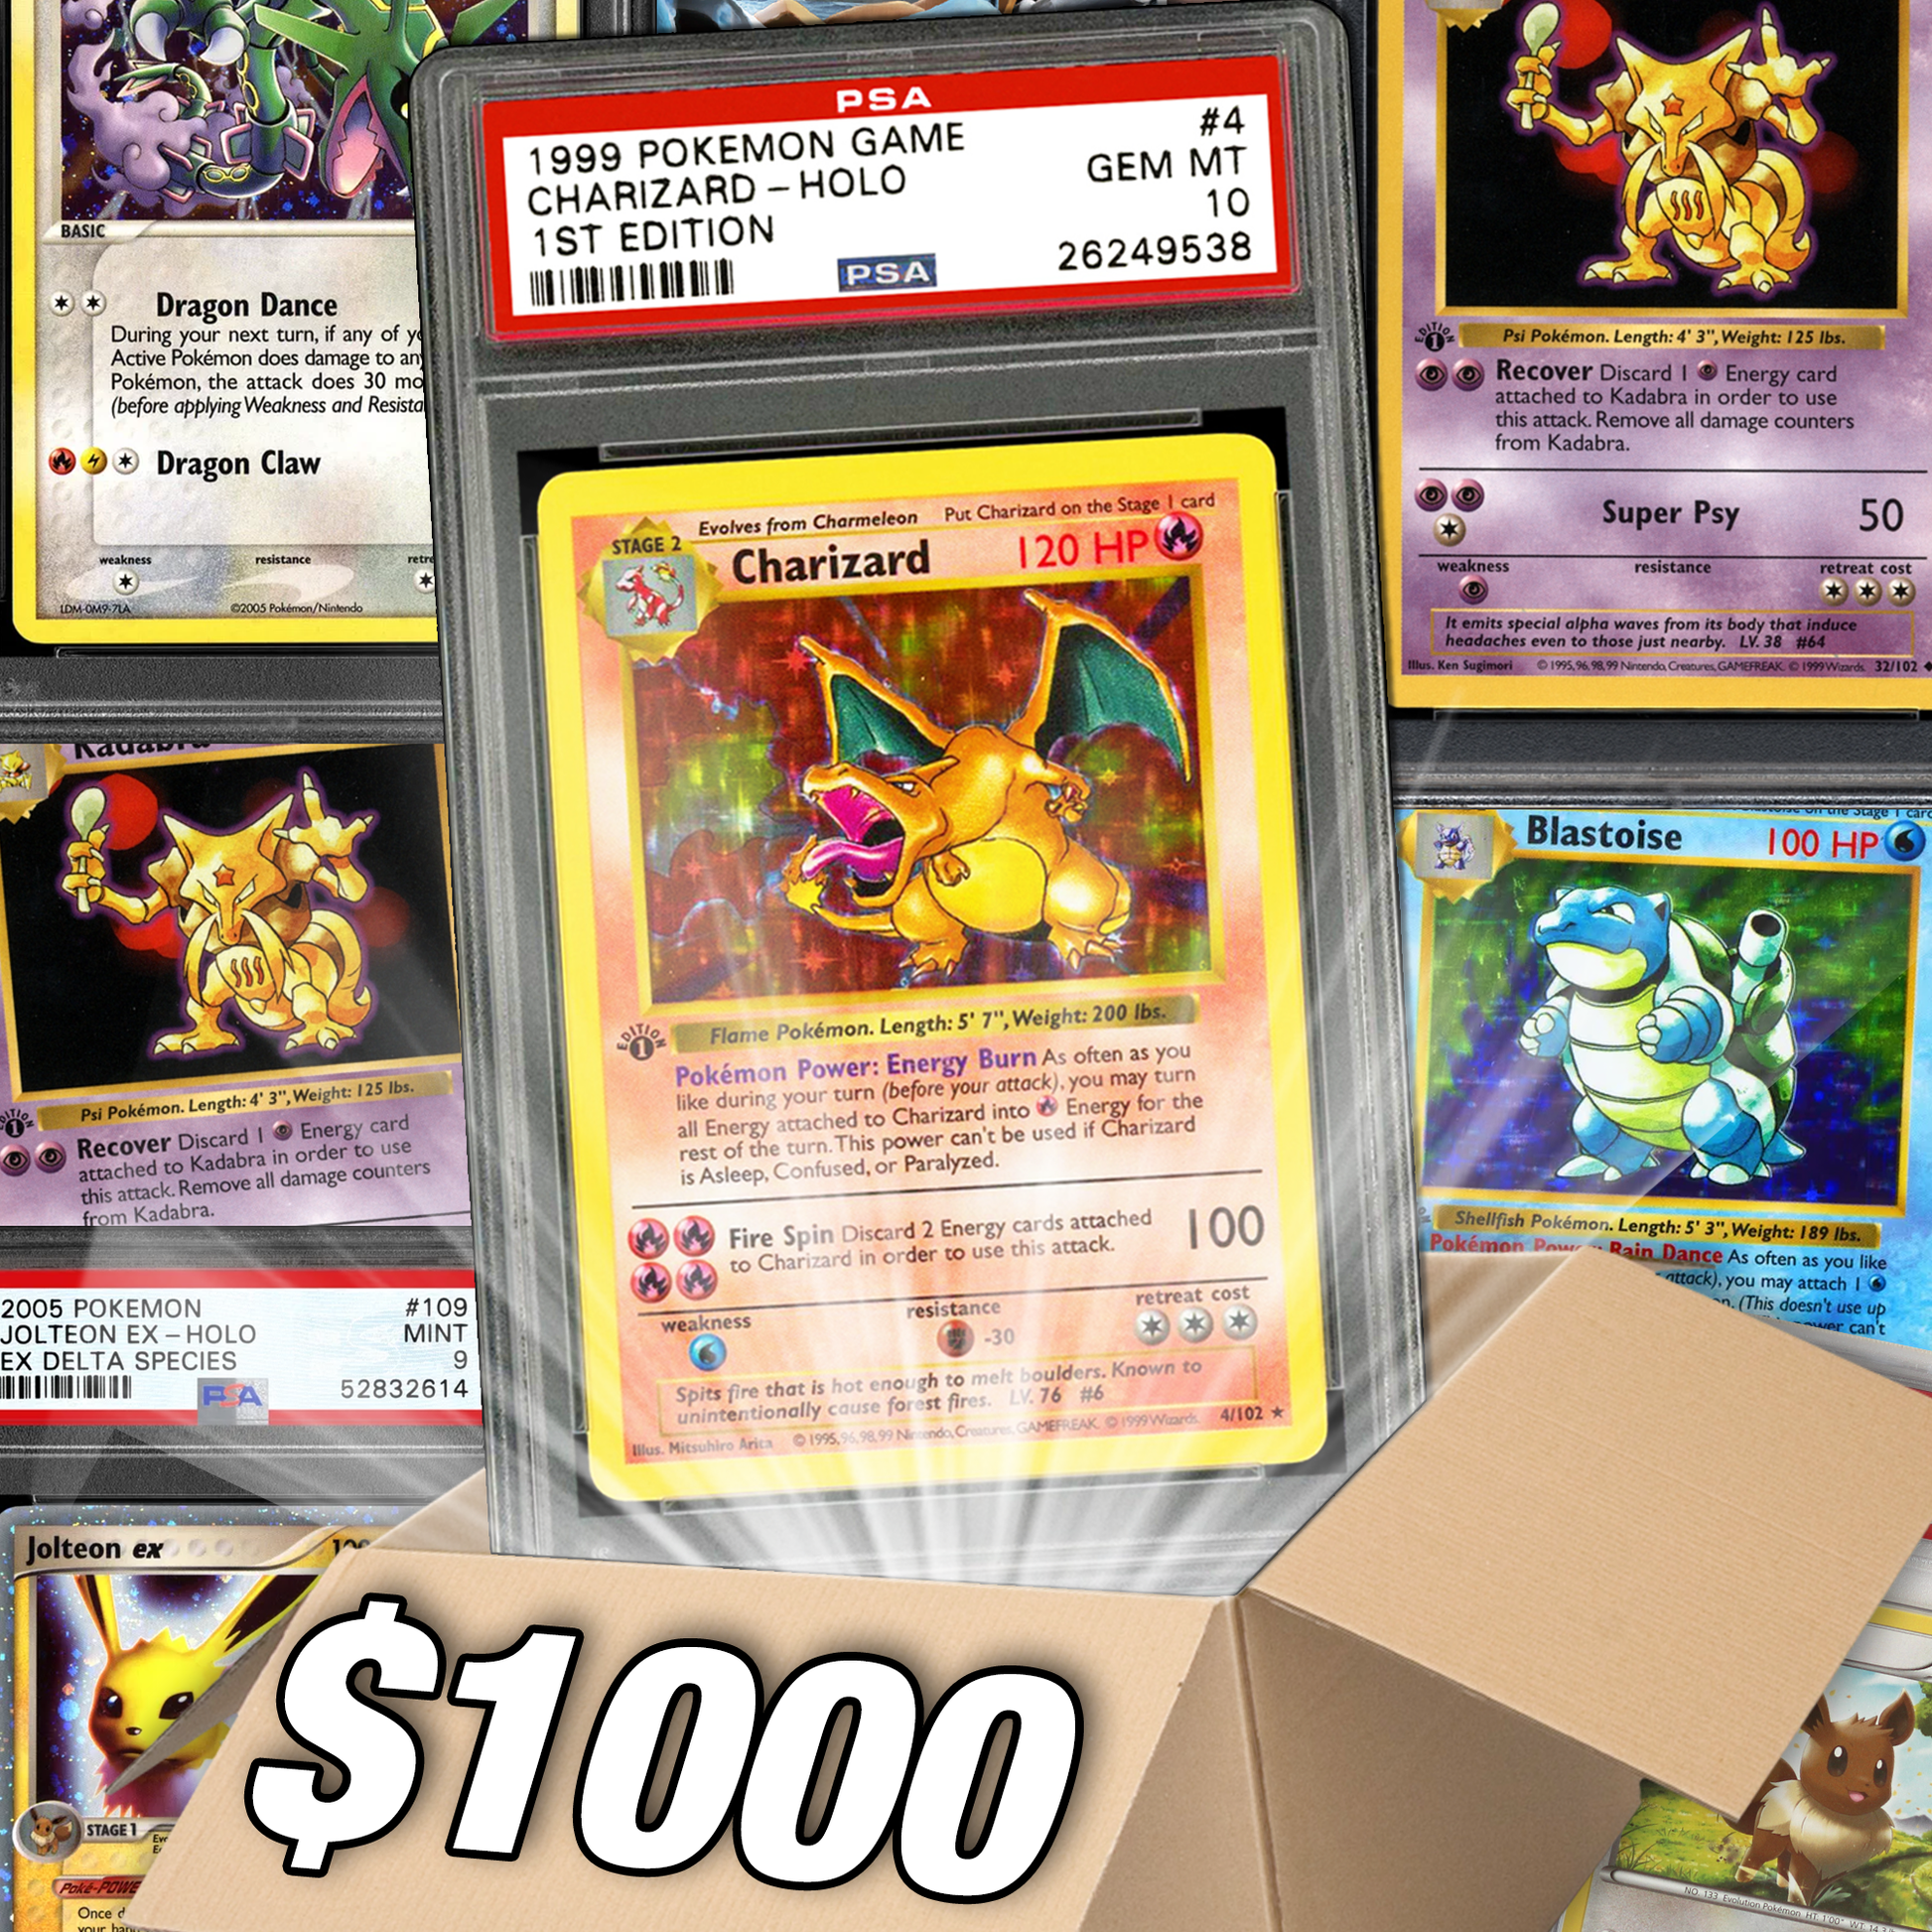 The Pokemon Card $1000 Box! - Assorted Pokémon Trading Cards - Premier Trading Cards